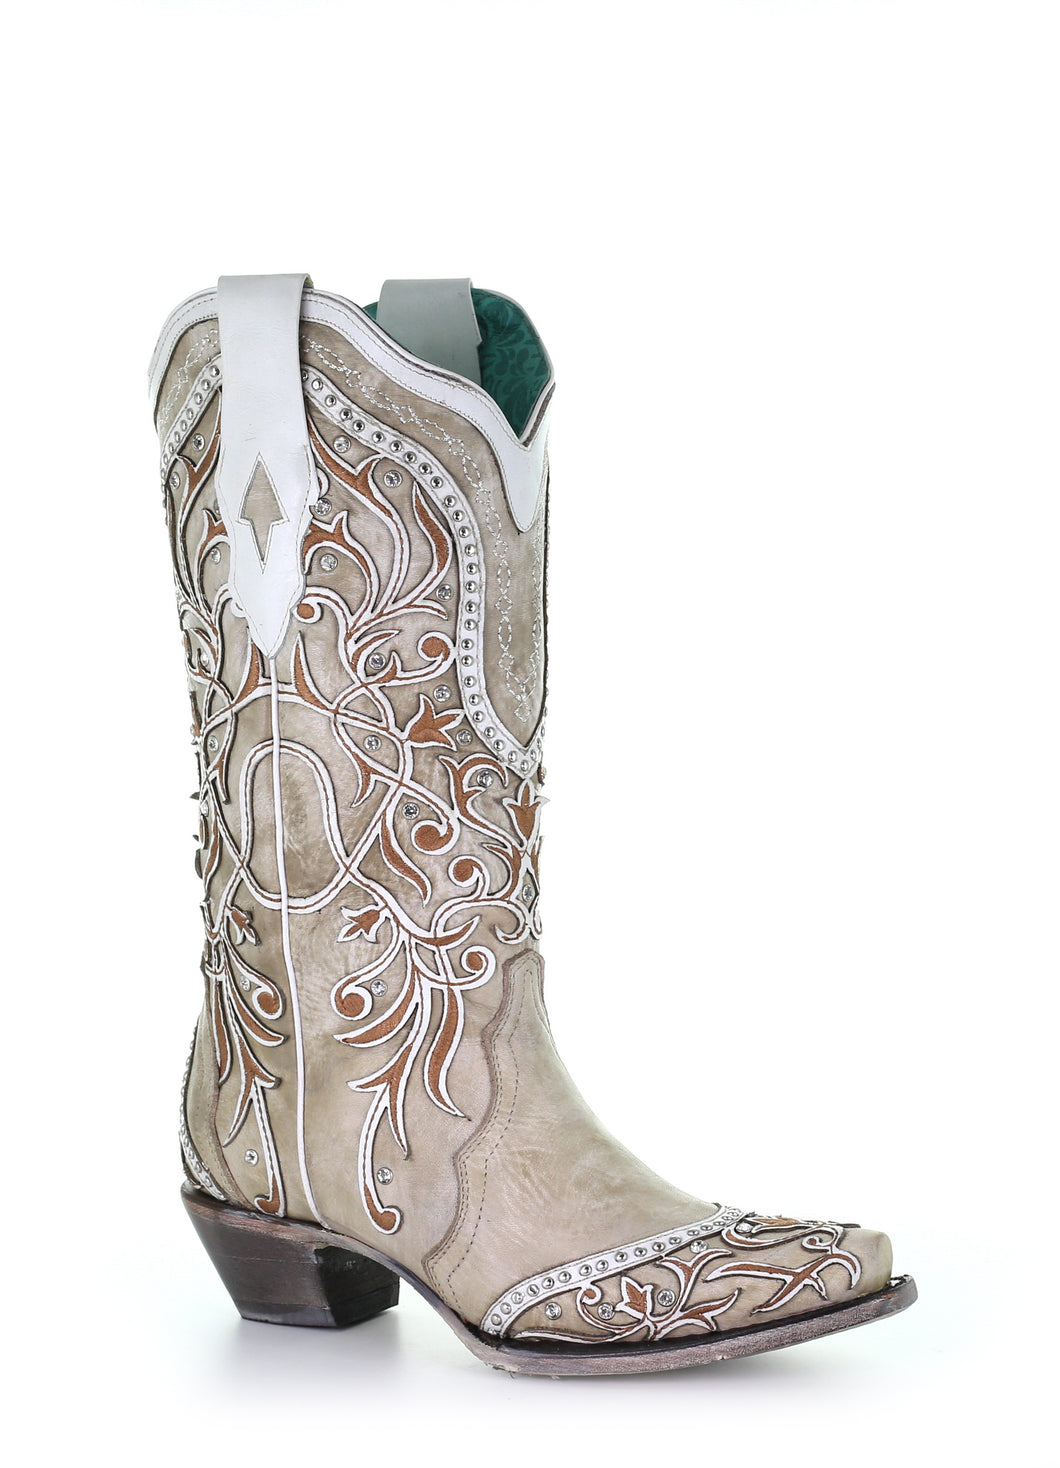 Corral Women's Boot Snip Toe A3837 White Inlay & Embroidery